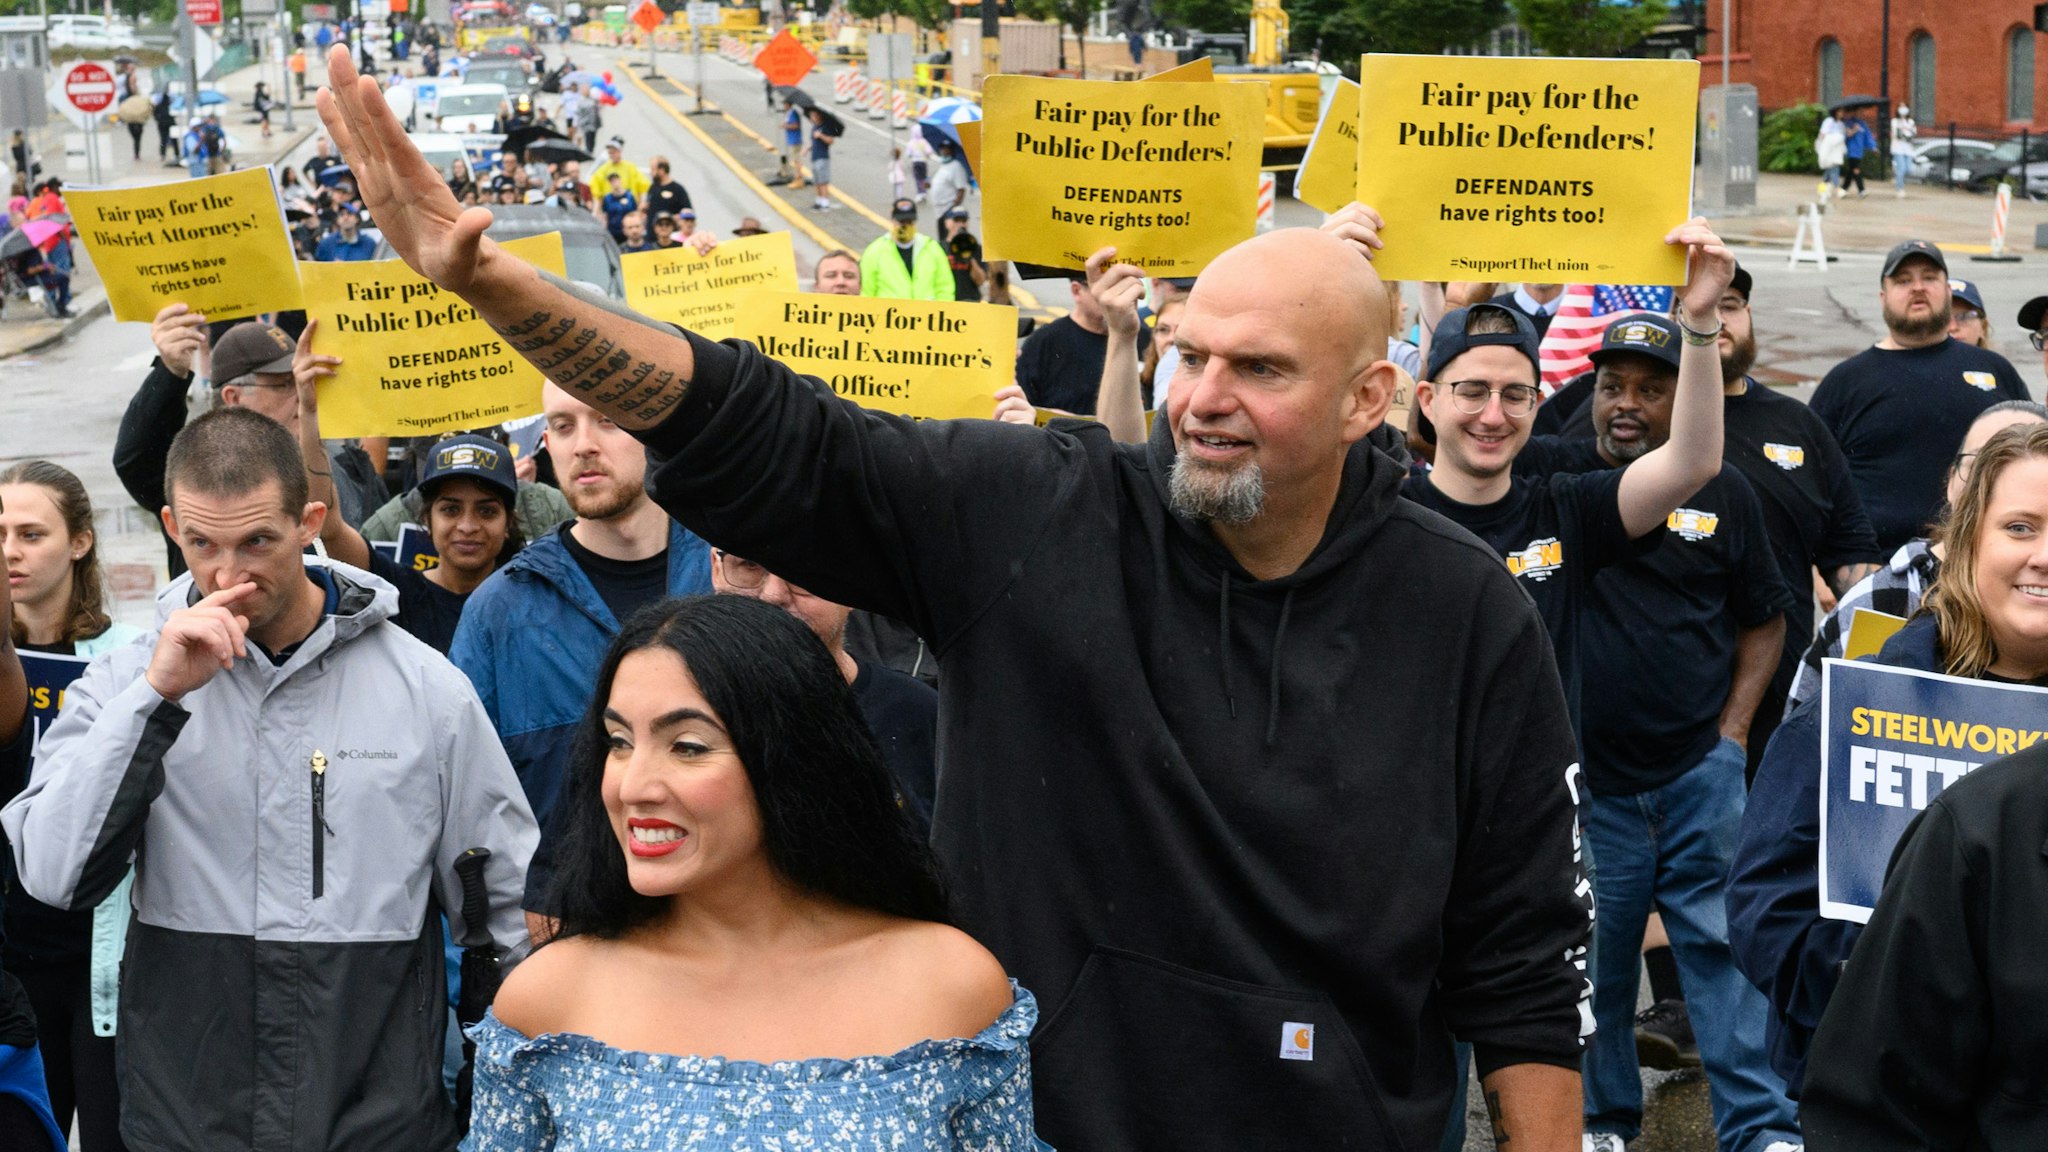 John Fetterman, lieutenant governor of Pennsylvania and Democratic senate candidate, center, and his wife Gisele Fetterman, center left, walk with the United Steelworkers District 10 union during a Labor Day parade in Pittsburgh, Pennsylvania, US, on Monday, Sept. 5, 2022. Pennsylvania is holding a number of high-profile election contests, including the open Senate seat race that is pitting Fetterman against Republican Mehmet Oz.